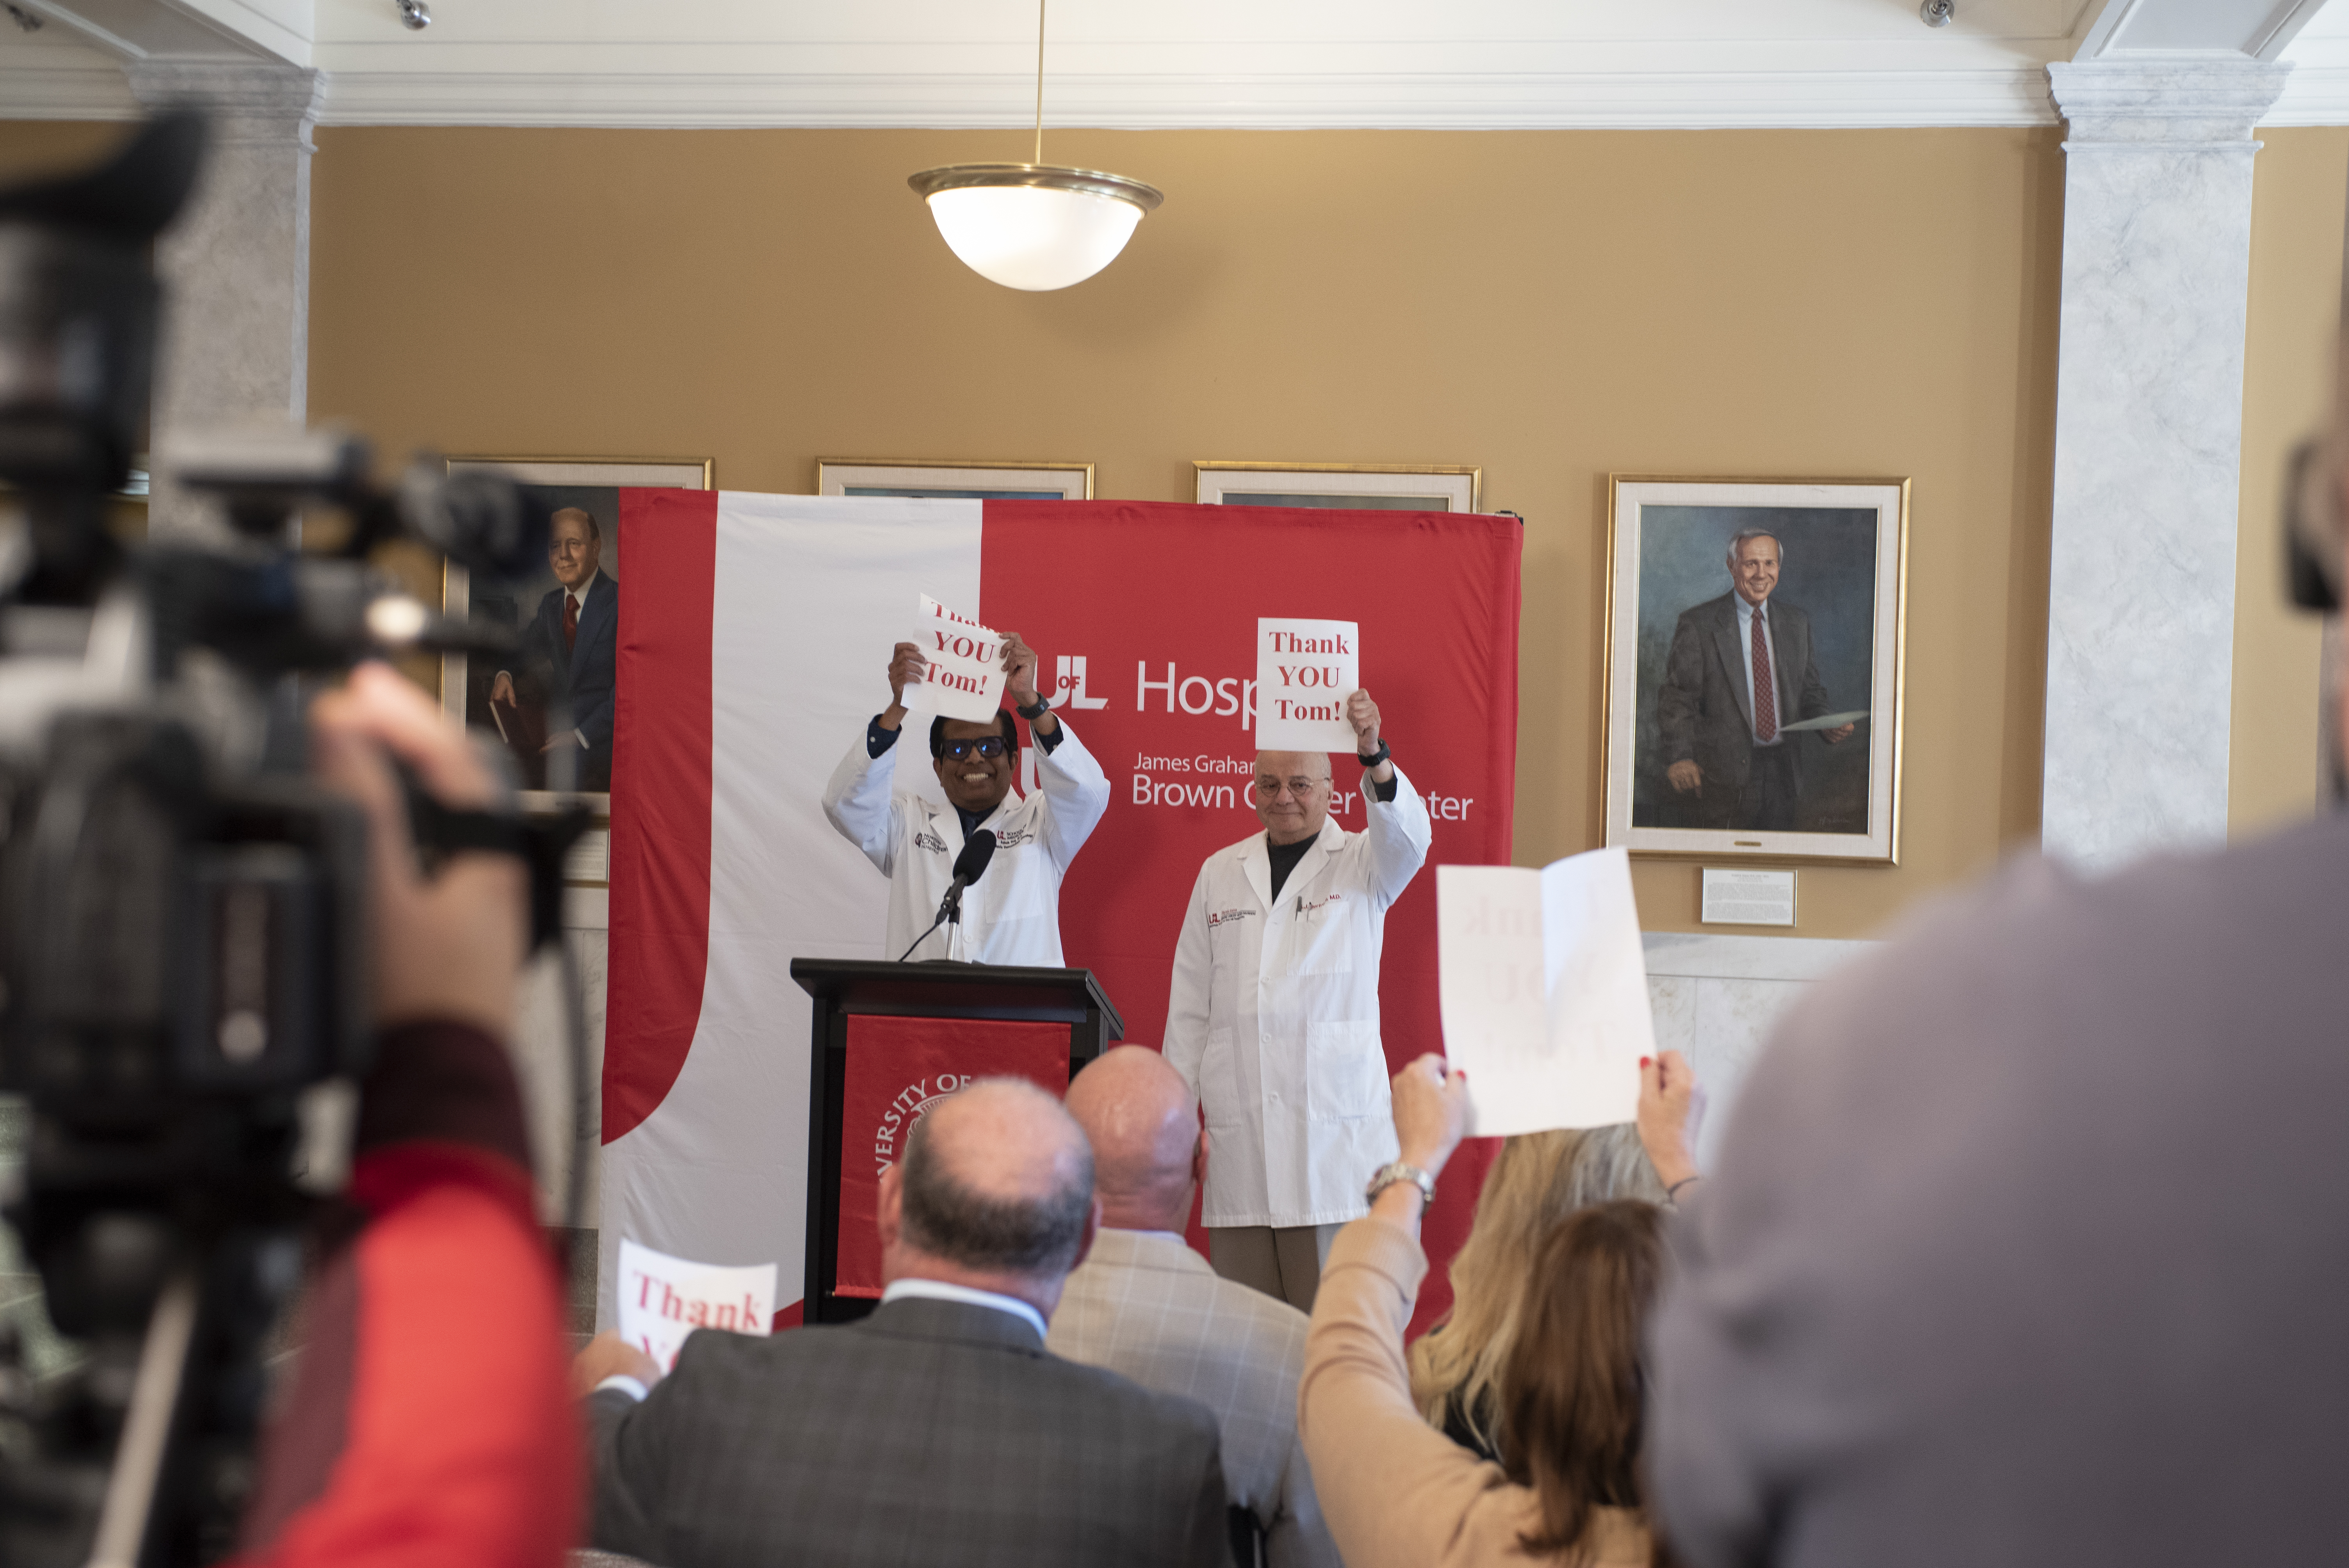 Louisville resident Thomas E. Dunbar has pledged $1 million to the University of Louisville to create a specialized center to provide chimeric antigen receptor positive T (CAR T) cell therapies to patients at the UofL James Graham Brown Cancer Center and other centers in Kentucky and the Midwest.